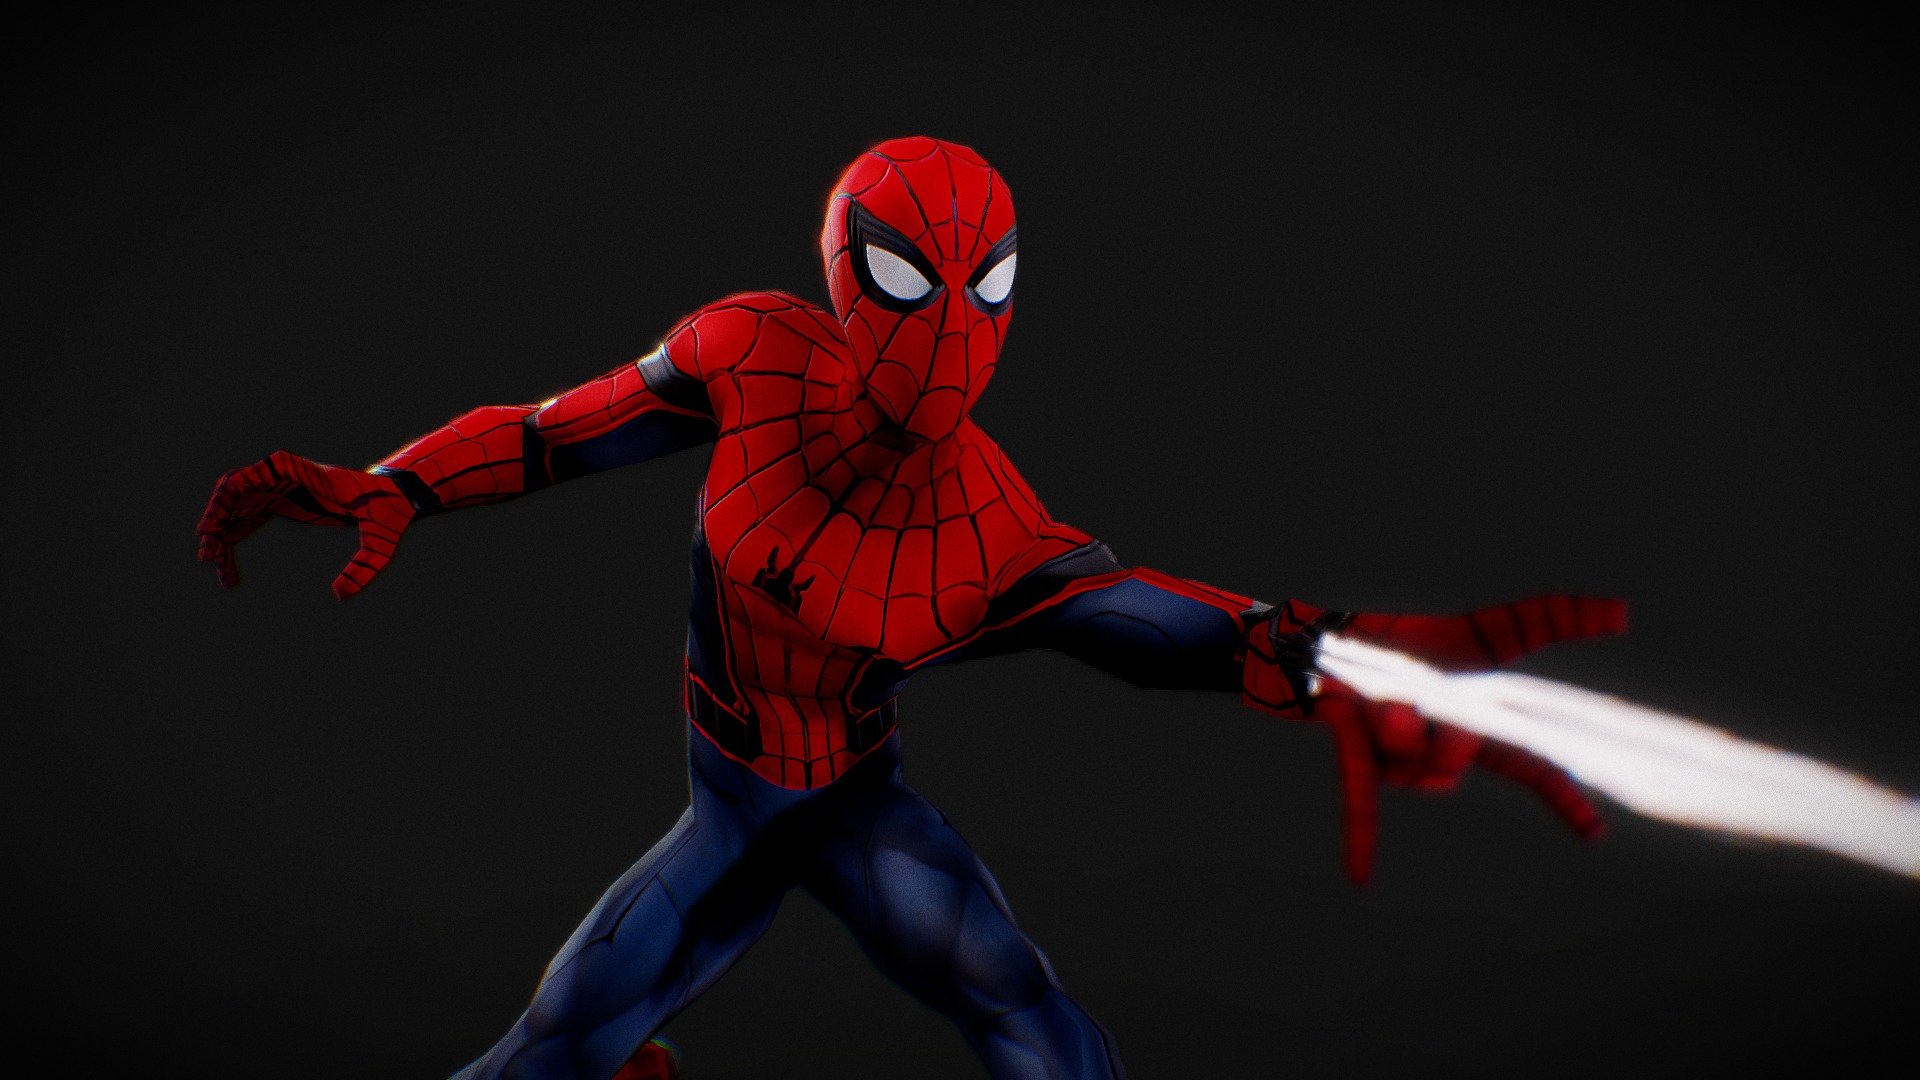 Model ported by TheVG-Resource Rigged in blender 2.79 by me using the rigify addon.

Also please support me in my coming models!

Peter Parker lost his parents, Richard and Mary Parker, at a young age. Orphaned, he had to live with his Uncle Ben and Aunt May. During a science exhibition, he was bitten by a Radioactive Spider, granting him his powers. He decided to use these powers for his own selfish gain, until his Uncle Ben died at the hands of a Burglar he could've stopped. It was at that point that he learned &ldquo;With great power, there must also come great responsibility